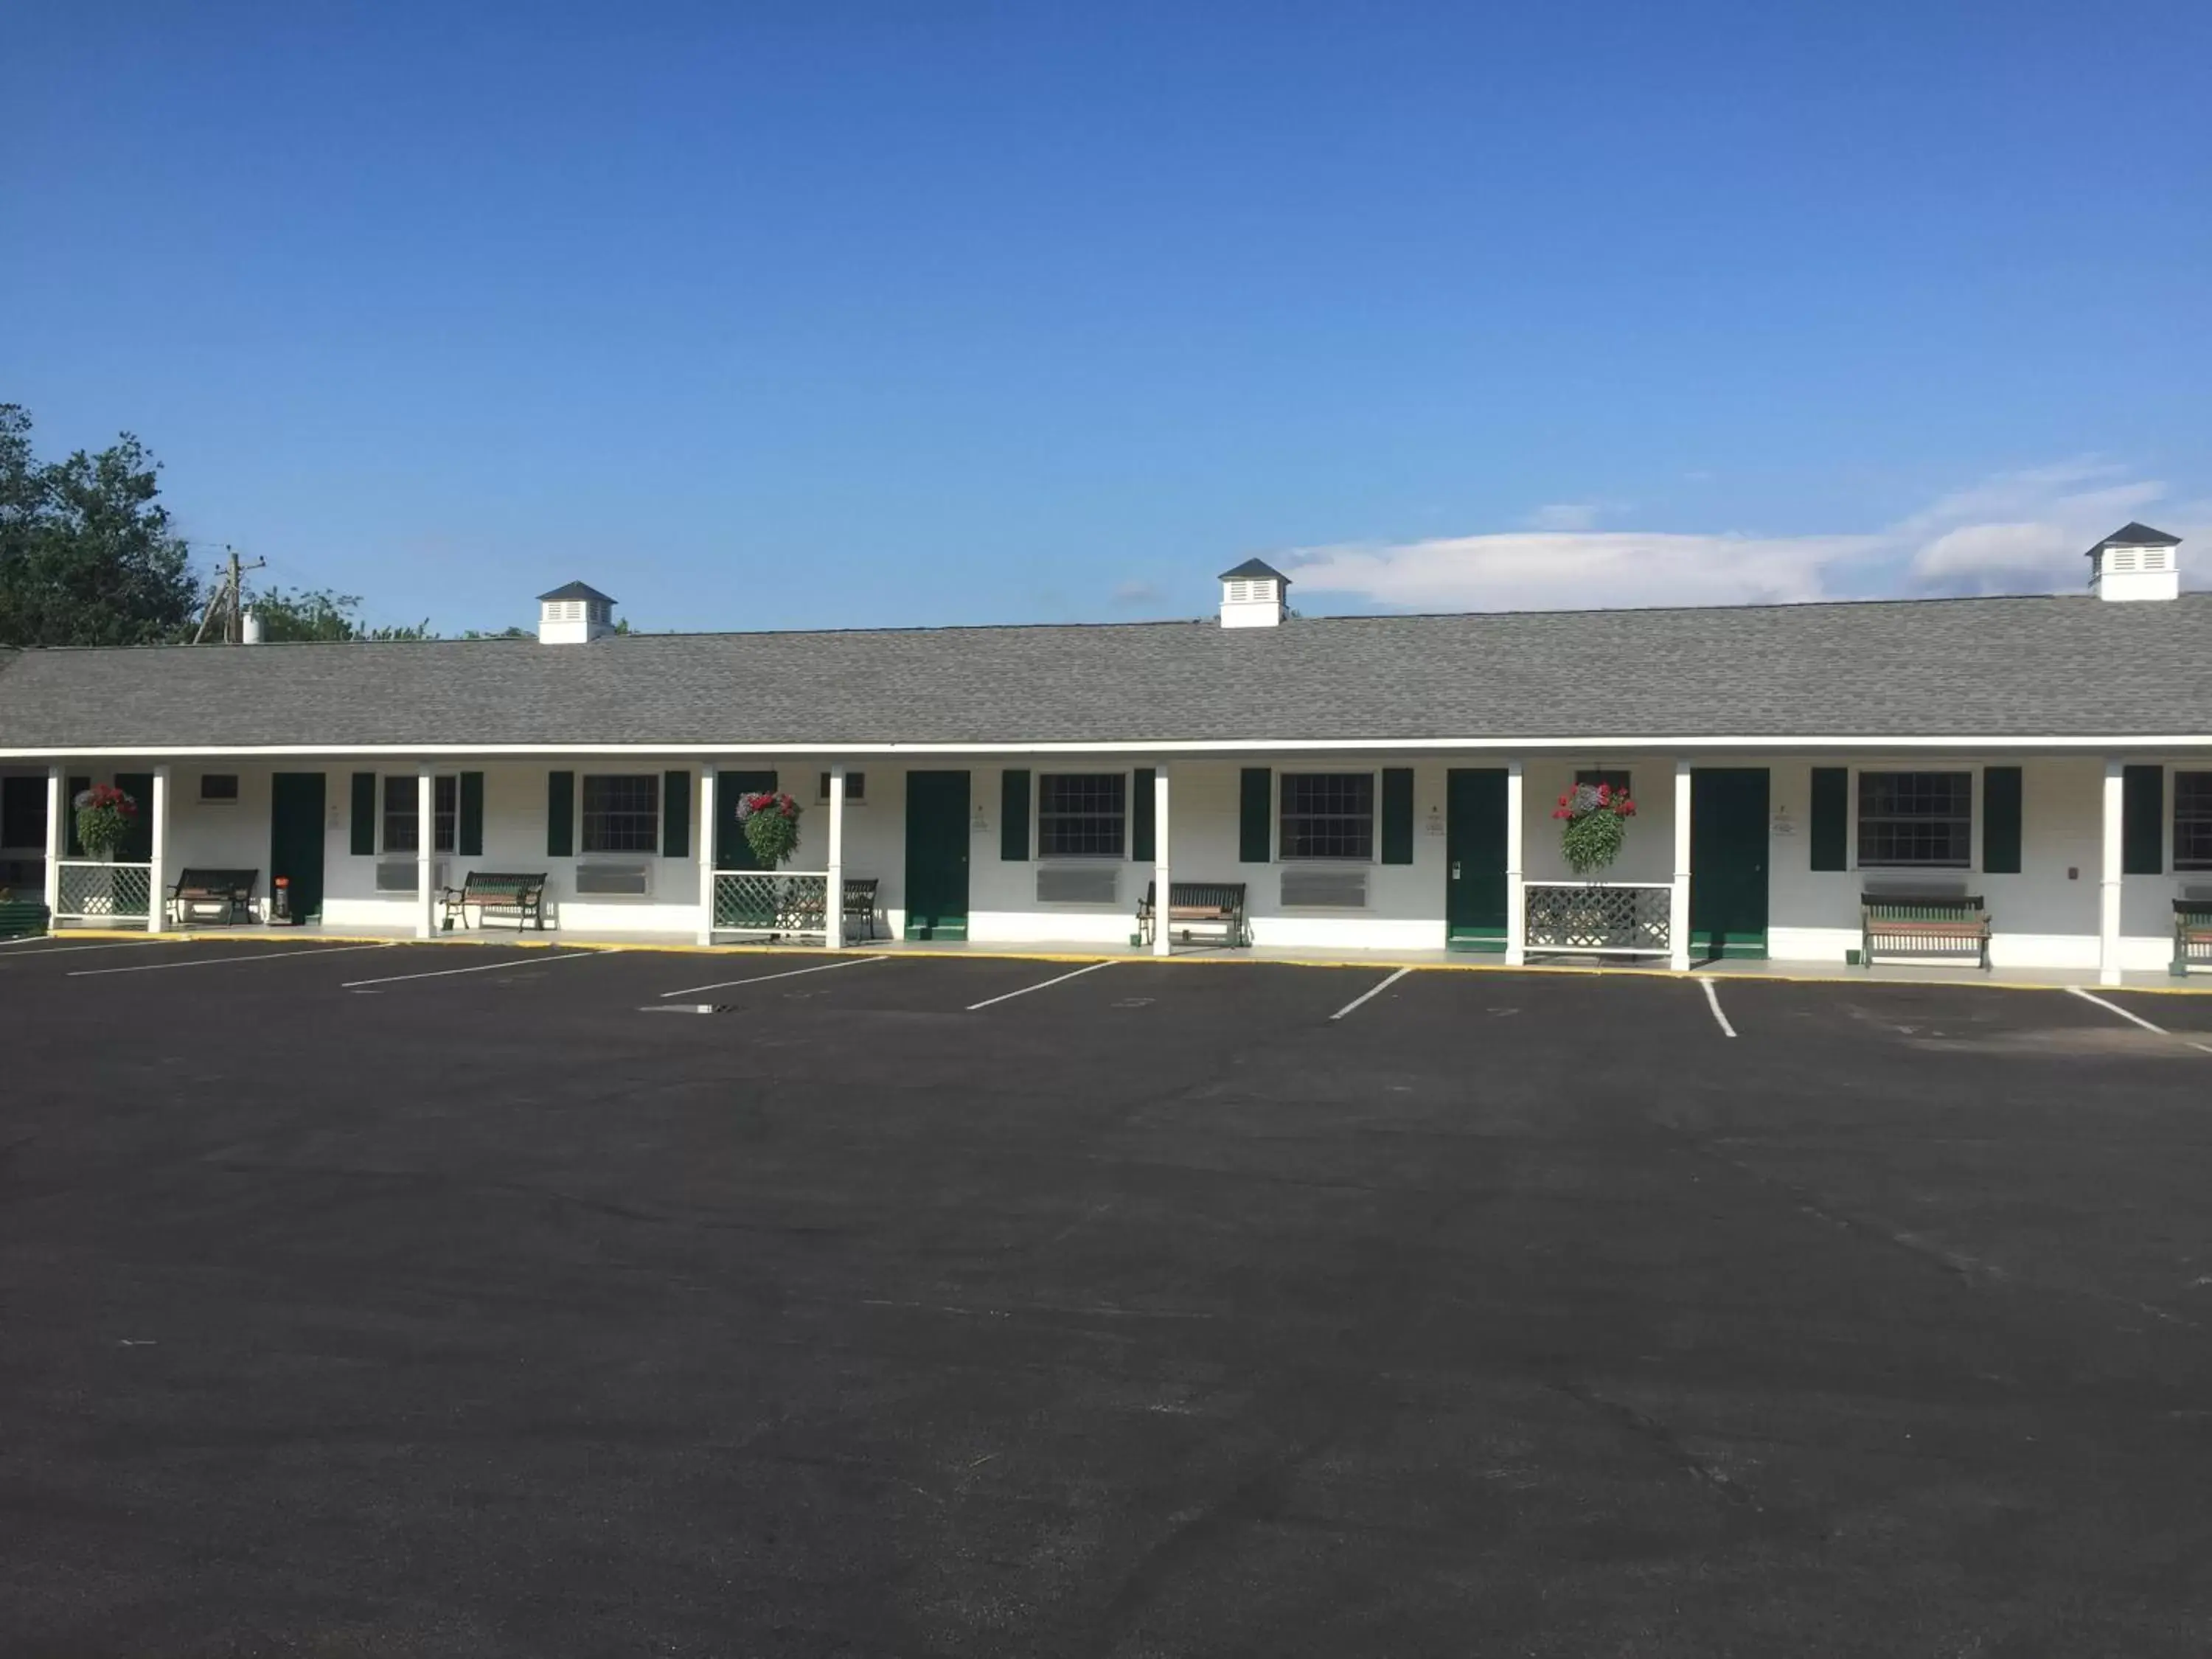 Property Building in Briarcliff Motel